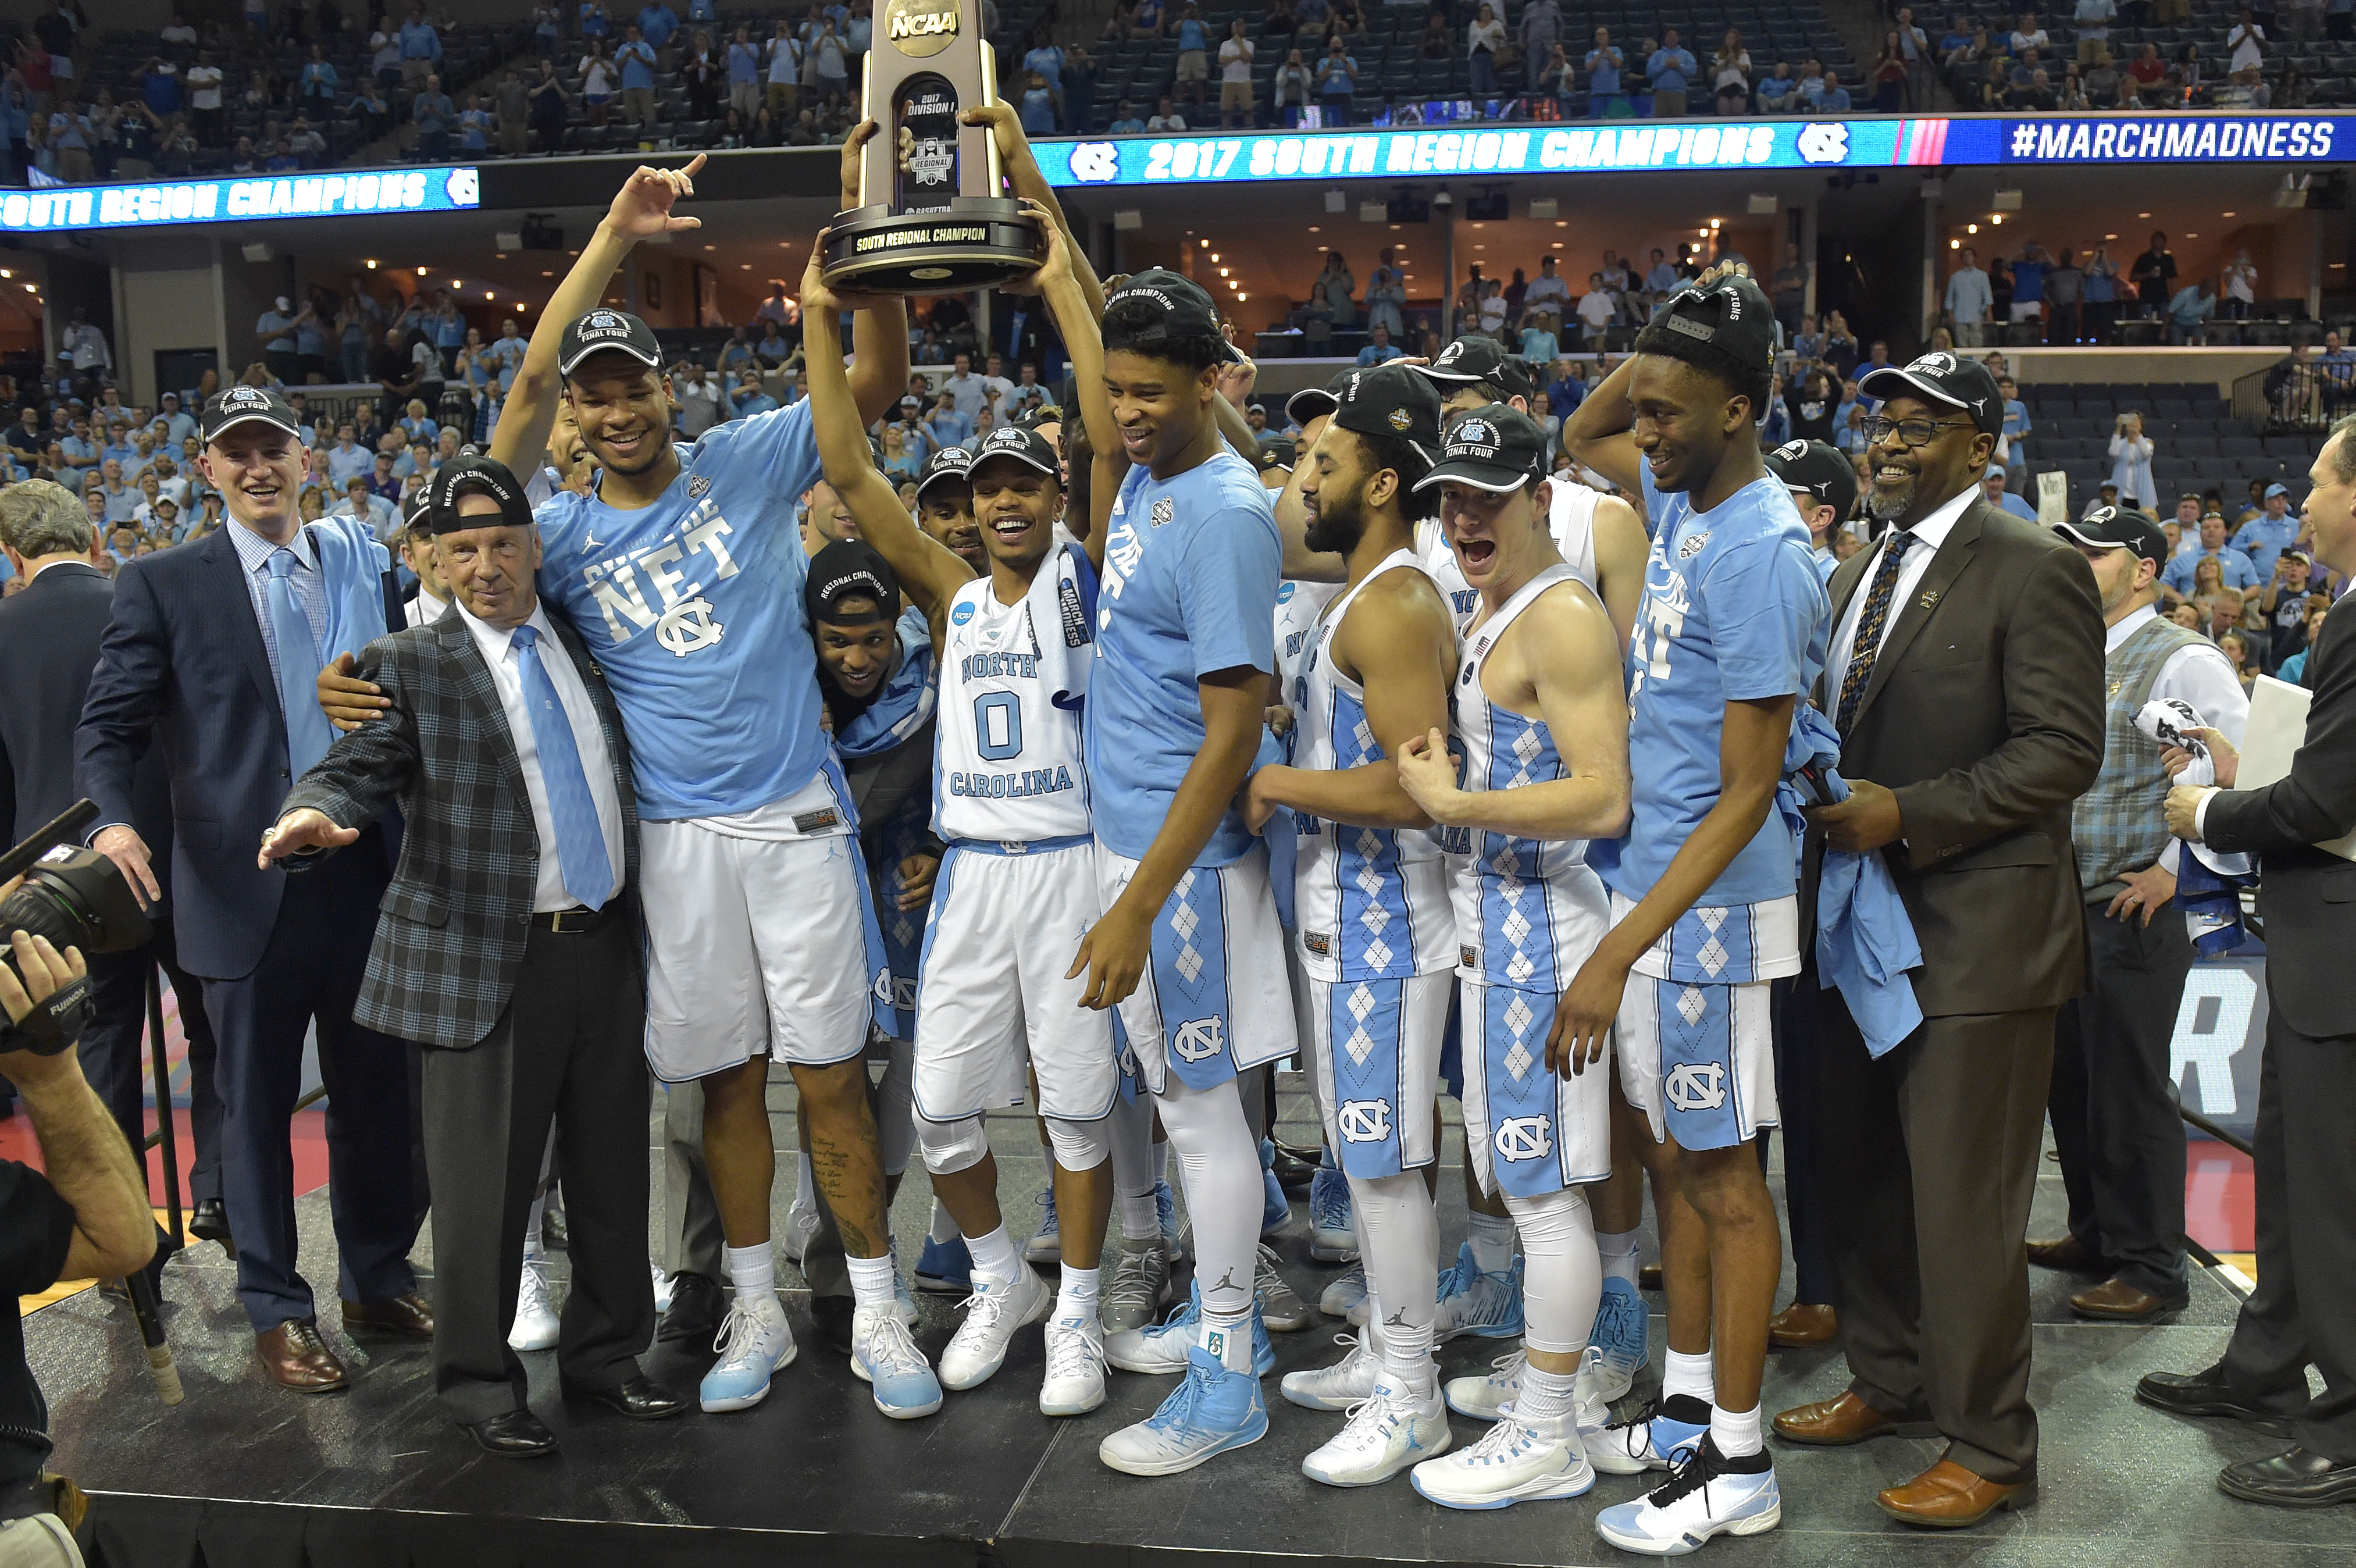 UNC Basketball This year's Tar Heels compared to last year's team